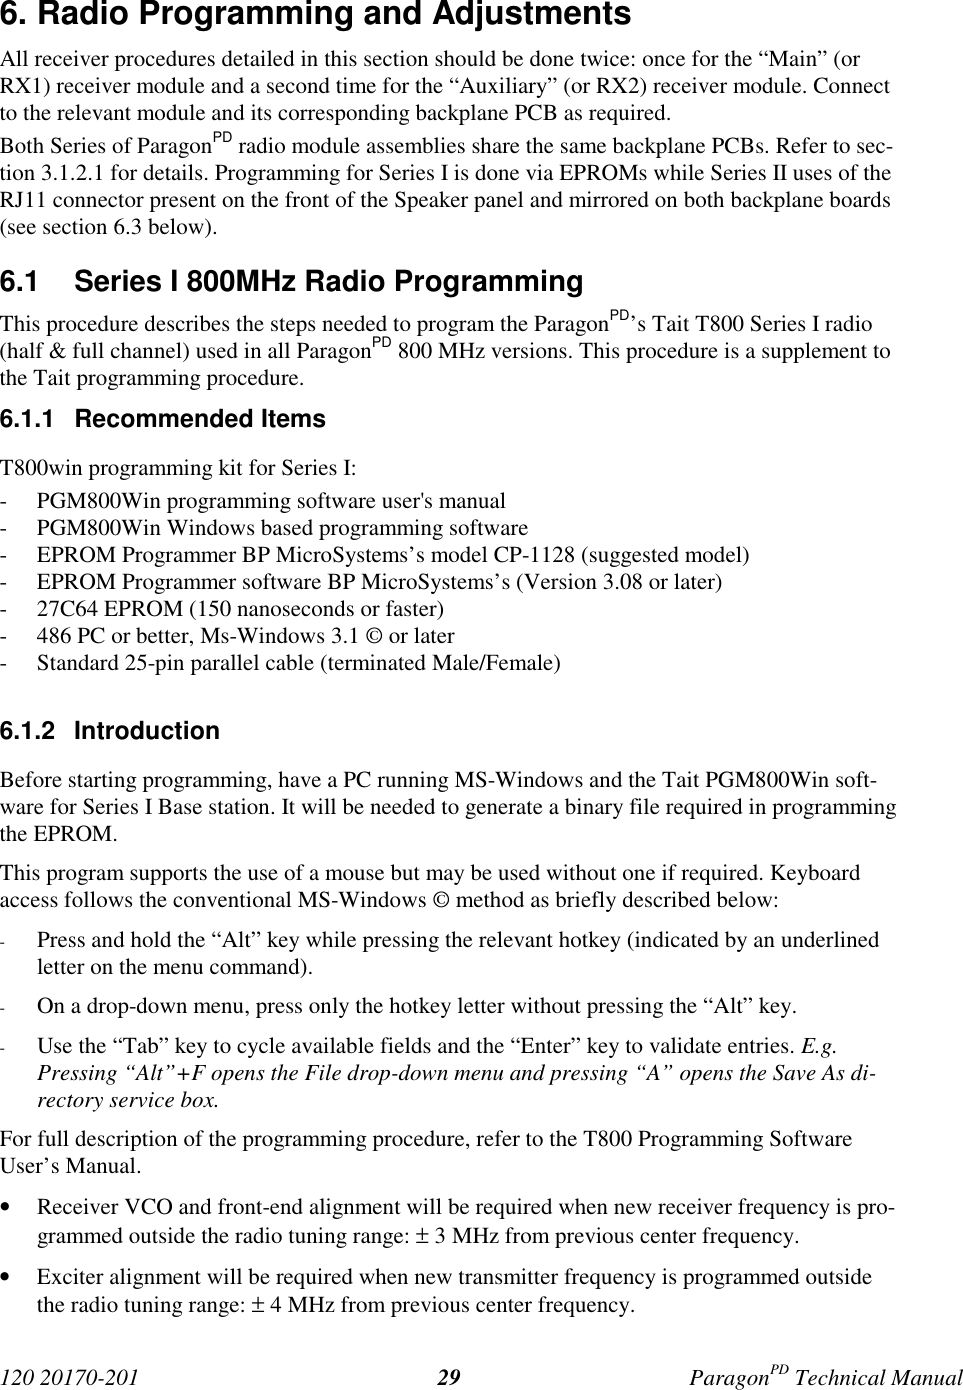 120 20170-201 ParagonPD Technical Manual296. Radio Programming and AdjustmentsAll receiver procedures detailed in this section should be done twice: once for the “Main” (orRX1) receiver module and a second time for the “Auxiliary” (or RX2) receiver module. Connectto the relevant module and its corresponding backplane PCB as required.Both Series of ParagonPD radio module assemblies share the same backplane PCBs. Refer to sec-tion 3.1.2.1 for details. Programming for Series I is done via EPROMs while Series II uses of theRJ11 connector present on the front of the Speaker panel and mirrored on both backplane boards(see section 6.3 below).6.1  Series I 800MHz Radio ProgrammingThis procedure describes the steps needed to program the ParagonPD’s Tait T800 Series I radio(half &amp; full channel) used in all ParagonPD 800 MHz versions. This procedure is a supplement tothe Tait programming procedure.6.1.1 Recommended ItemsT800win programming kit for Series I:- PGM800Win programming software user&apos;s manual- PGM800Win Windows based programming software- EPROM Programmer BP MicroSystems’s model CP-1128 (suggested model)- EPROM Programmer software BP MicroSystems’s (Version 3.08 or later)- 27C64 EPROM (150 nanoseconds or faster)- 486 PC or better, Ms-Windows 3.1 © or later- Standard 25-pin parallel cable (terminated Male/Female)6.1.2 IntroductionBefore starting programming, have a PC running MS-Windows and the Tait PGM800Win soft-ware for Series I Base station. It will be needed to generate a binary file required in programmingthe EPROM.This program supports the use of a mouse but may be used without one if required. Keyboardaccess follows the conventional MS-Windows © method as briefly described below:- Press and hold the “Alt” key while pressing the relevant hotkey (indicated by an underlinedletter on the menu command).- On a drop-down menu, press only the hotkey letter without pressing the “Alt” key.- Use the “Tab” key to cycle available fields and the “Enter” key to validate entries. E.g.Pressing “Alt”+F opens the File drop-down menu and pressing “A” opens the Save As di-rectory service box.For full description of the programming procedure, refer to the T800 Programming SoftwareUser’s Manual.• Receiver VCO and front-end alignment will be required when new receiver frequency is pro-grammed outside the radio tuning range: ± 3 MHz from previous center frequency.• Exciter alignment will be required when new transmitter frequency is programmed outsidethe radio tuning range: ± 4 MHz from previous center frequency.